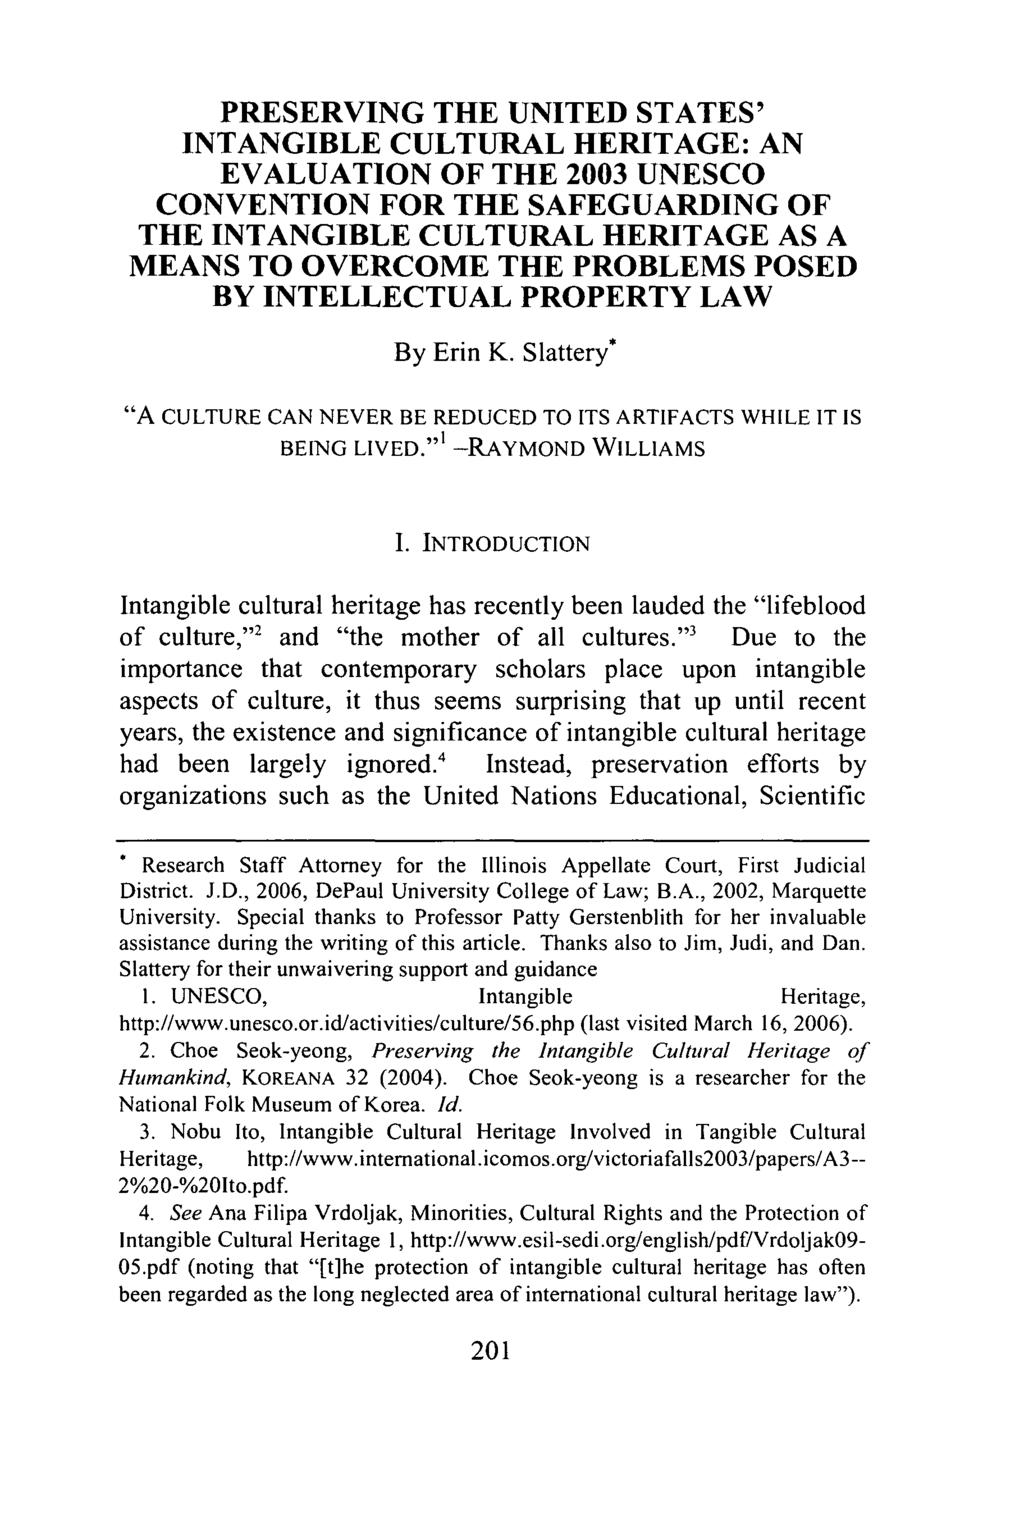 Slattery: Preserving the United States' Intangible Cultural Heritage: An Ev PRESERVING THE UNITED STATES' INTANGIBLE CULTURAL HERITAGE: AN EVALUATION OF THE 2003 UNESCO CONVENTION FOR THE